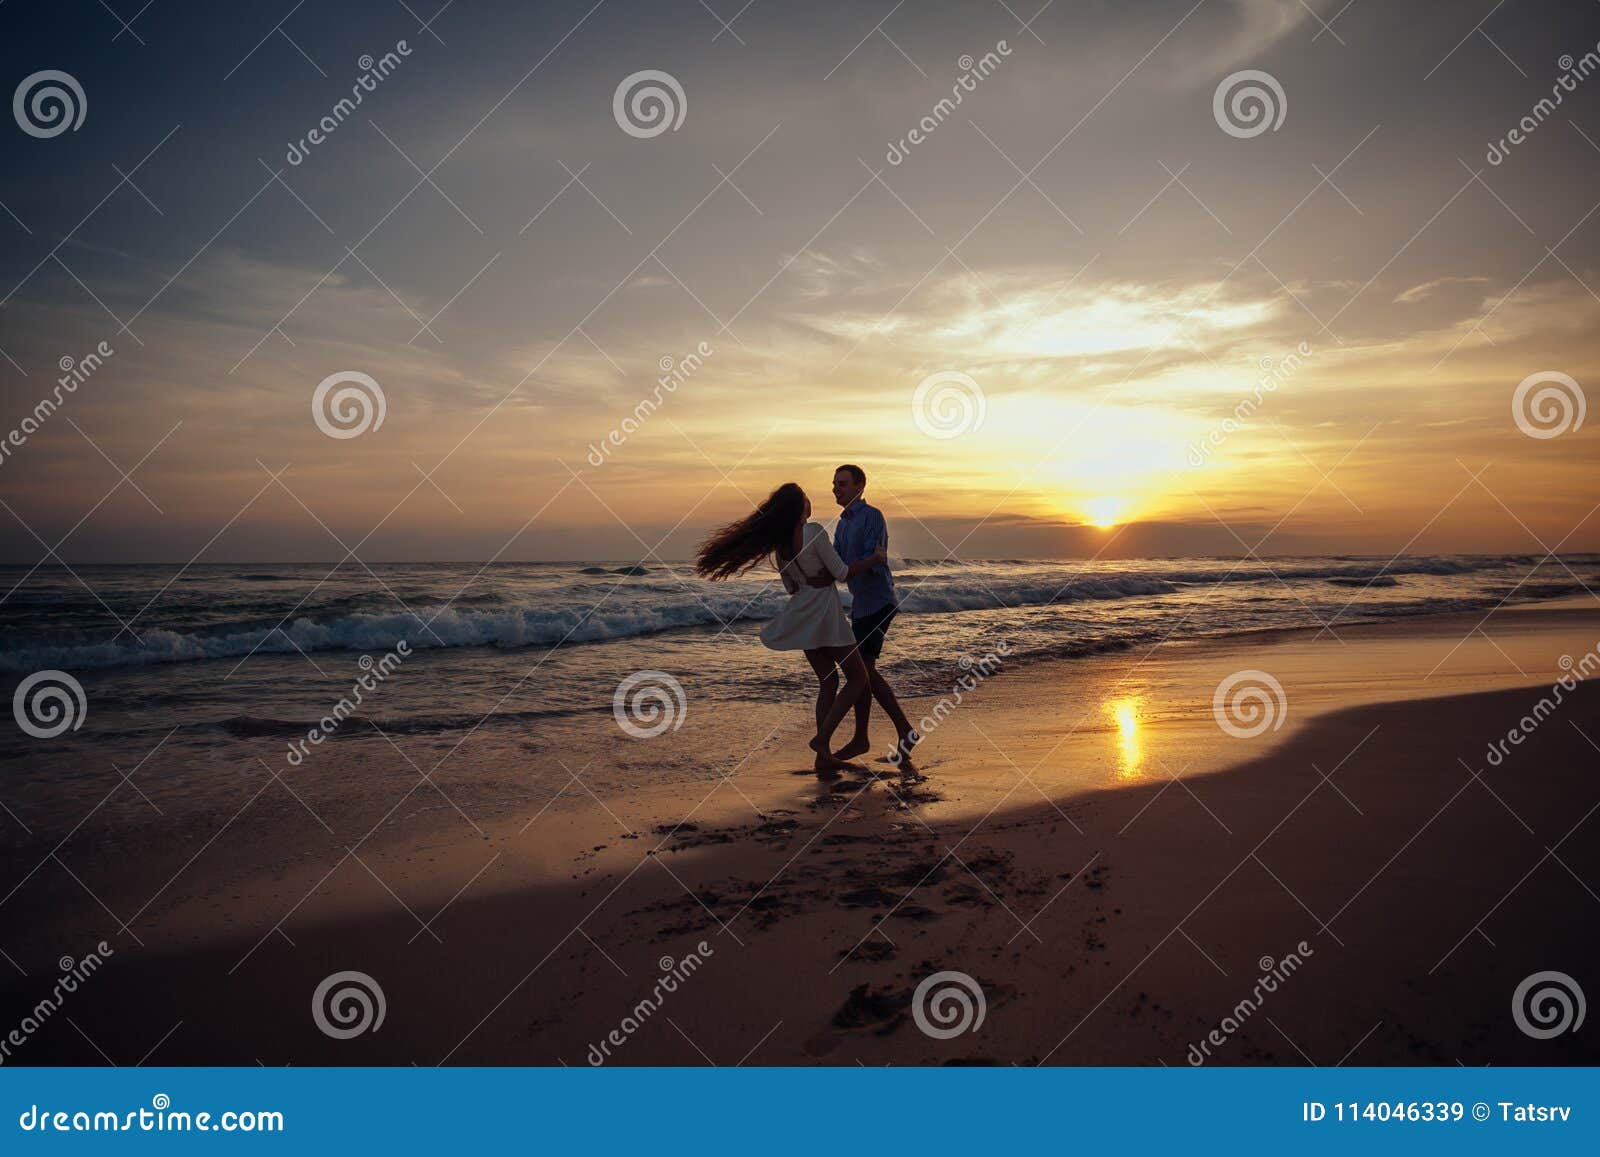 Happiness And Romantic Scene Of Love Couples Partners On Sunset At